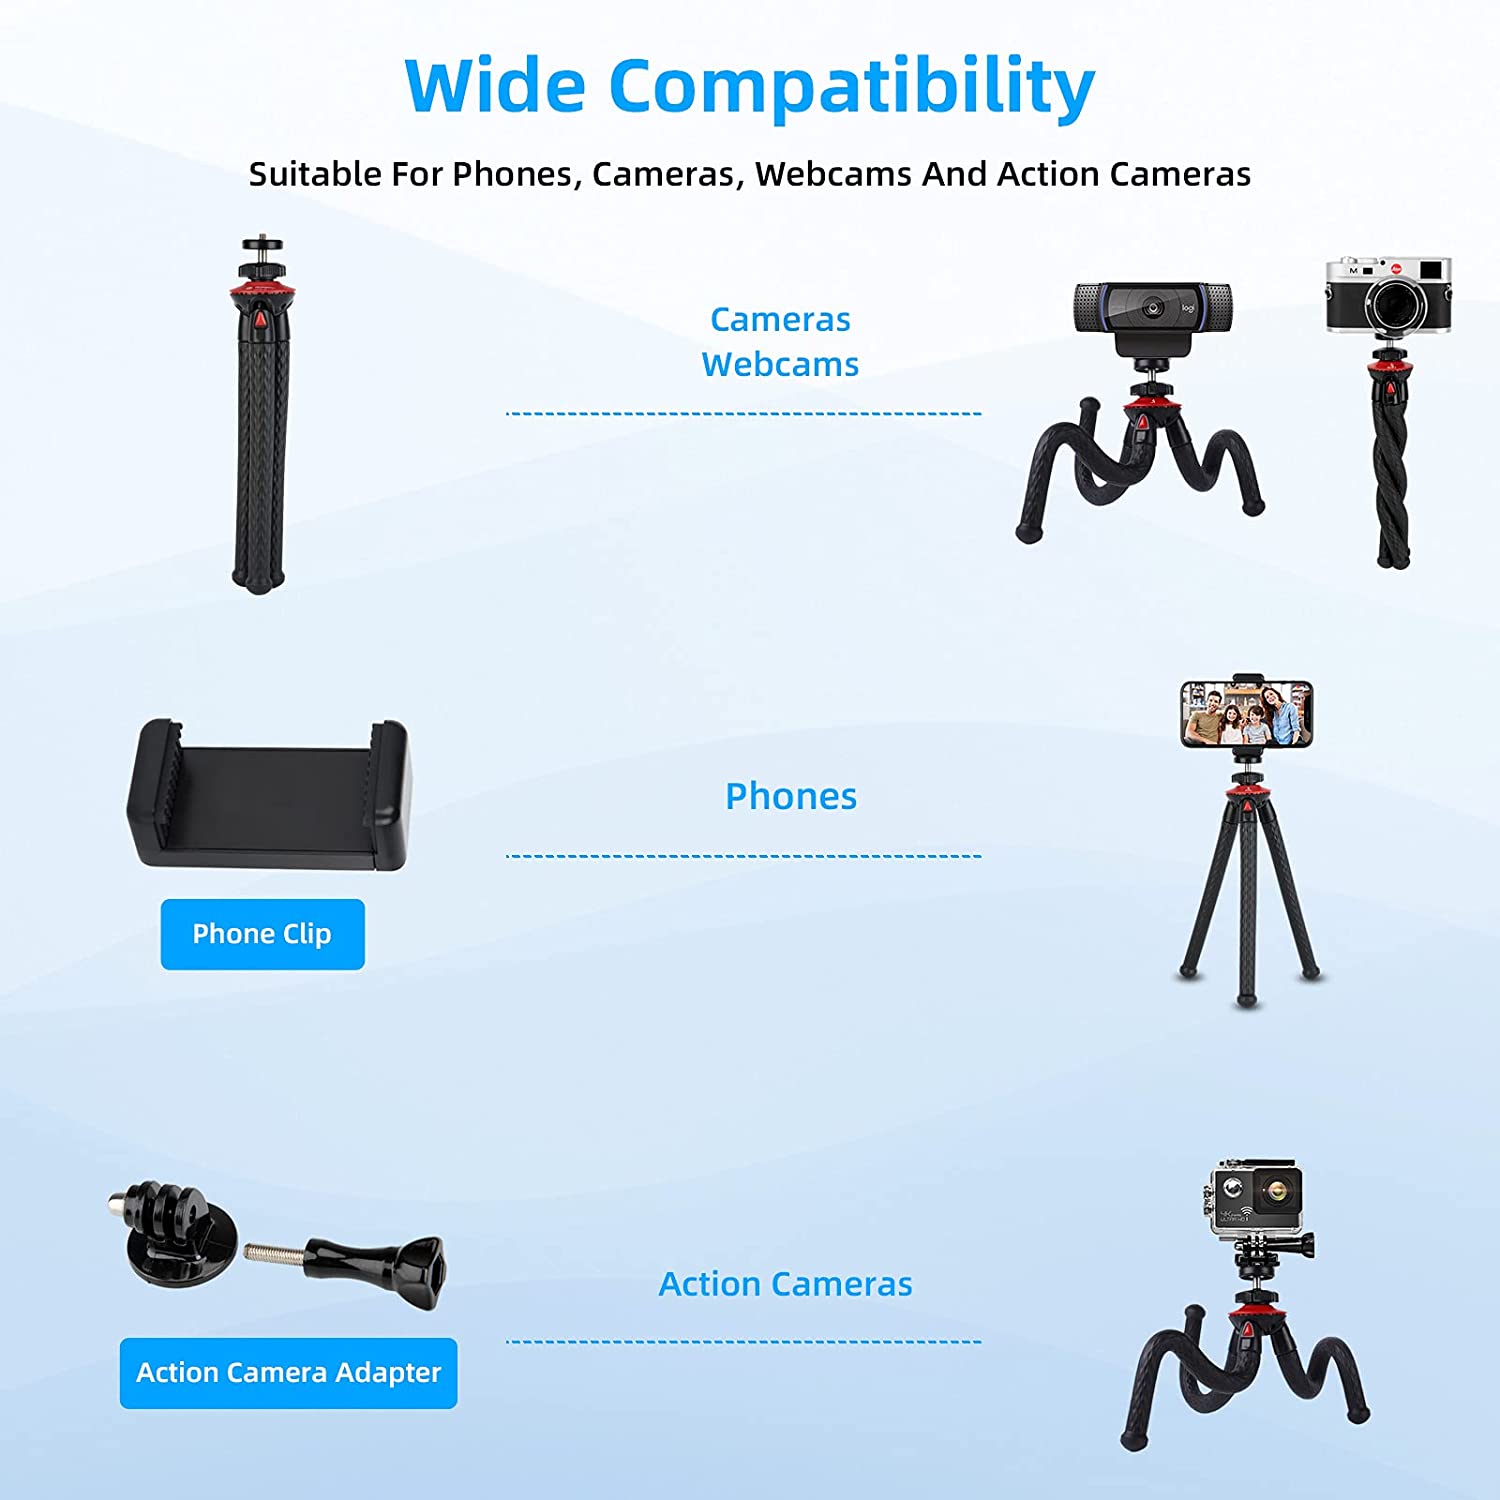 The holder can be widely used for cameras, phones, and action cameras.